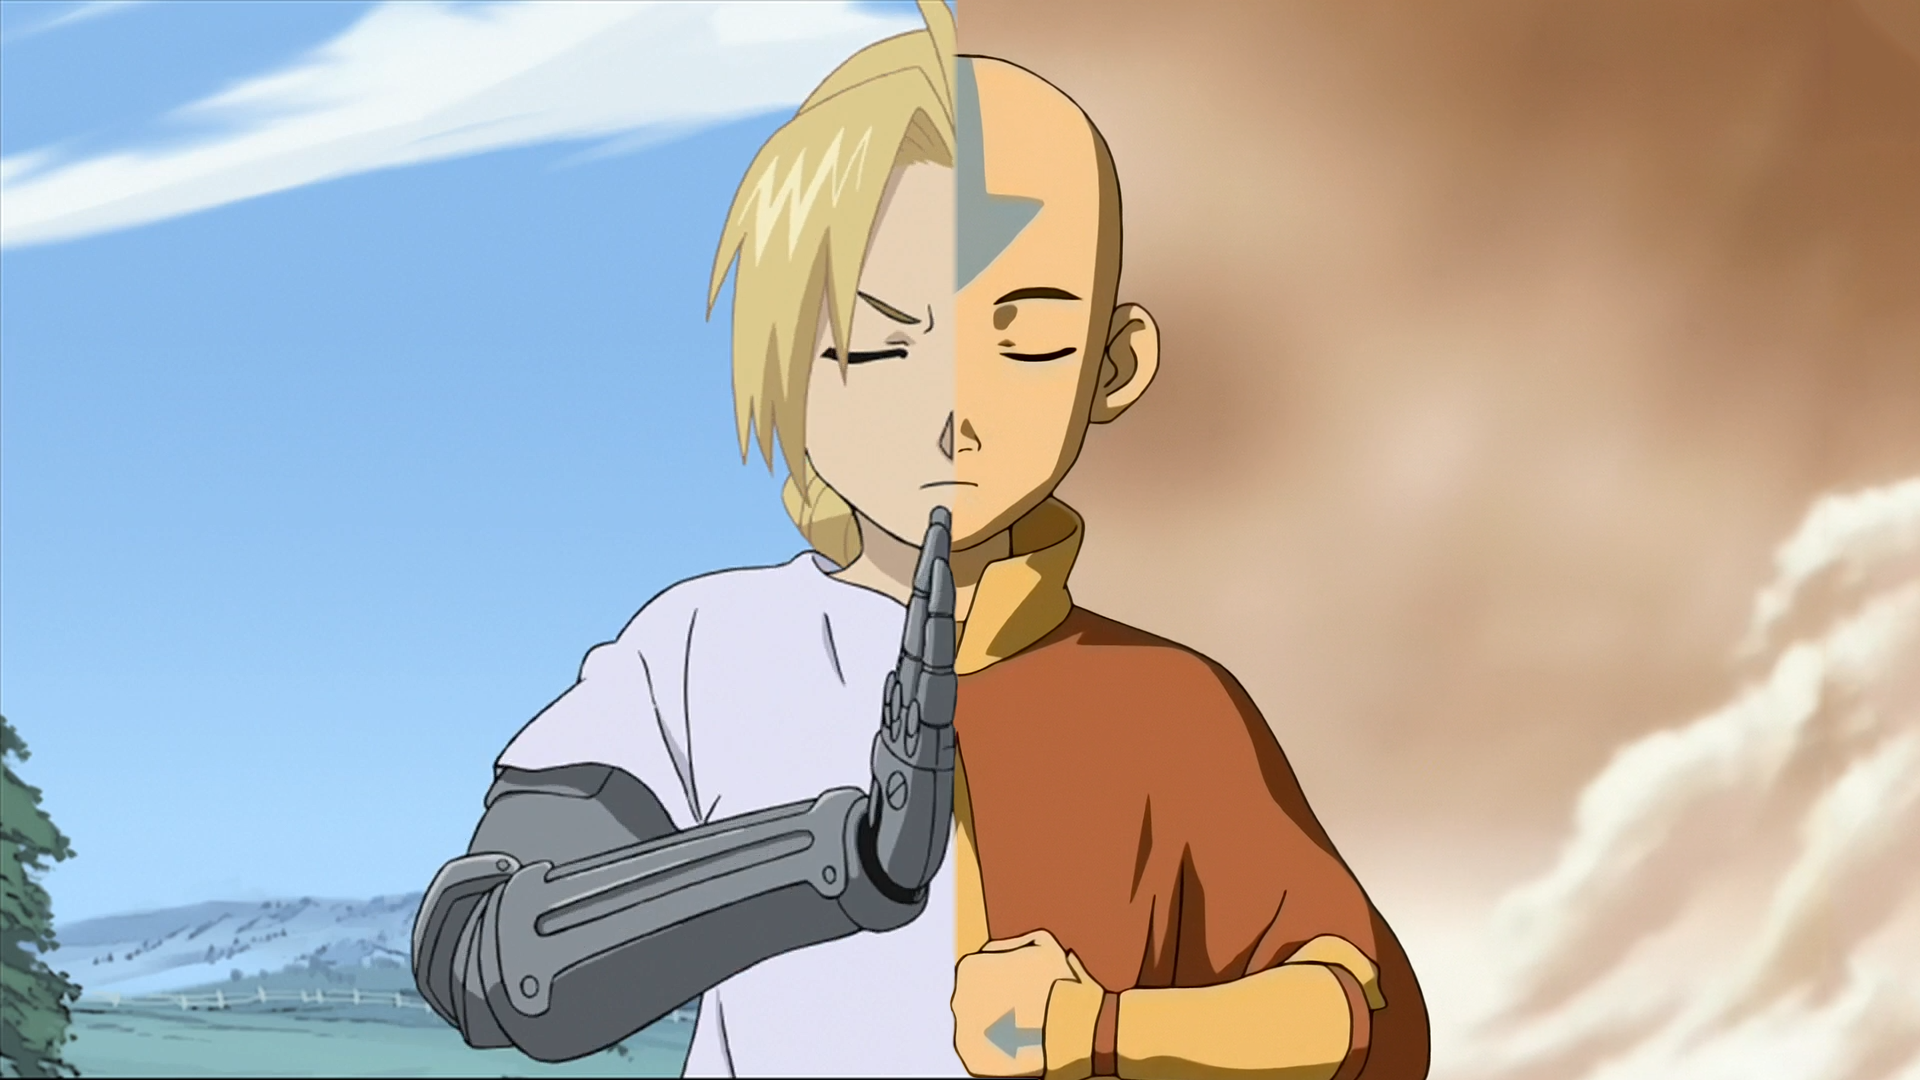 Anime or Cartoon? Edward from Fullmetal Alchemist and Aang from Avatar